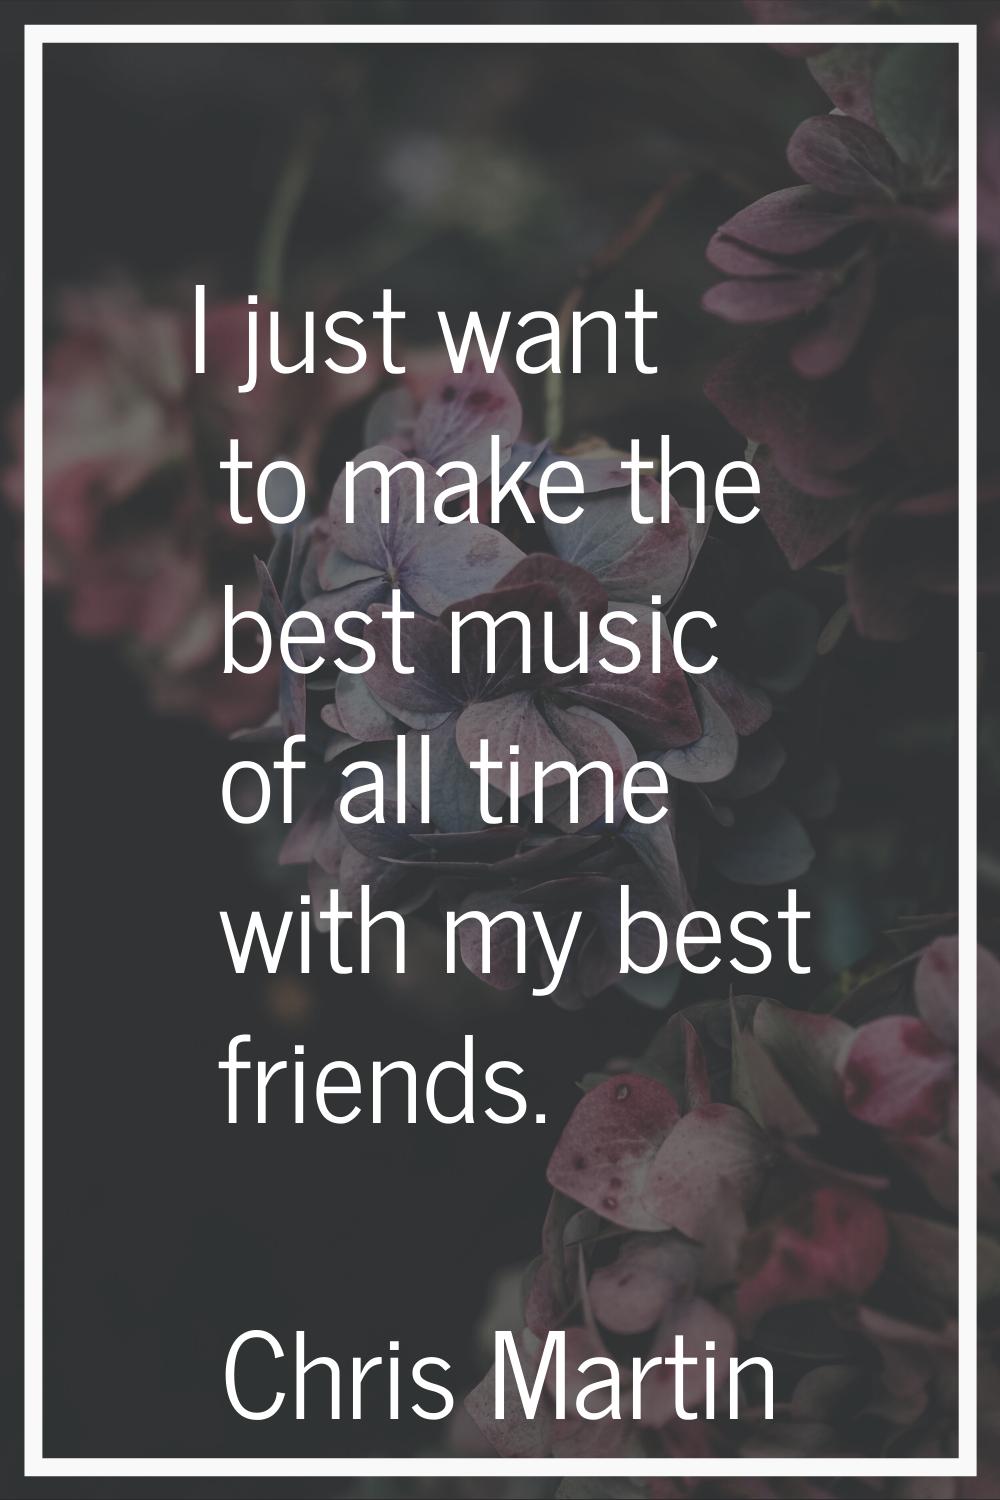 I just want to make the best music of all time with my best friends.